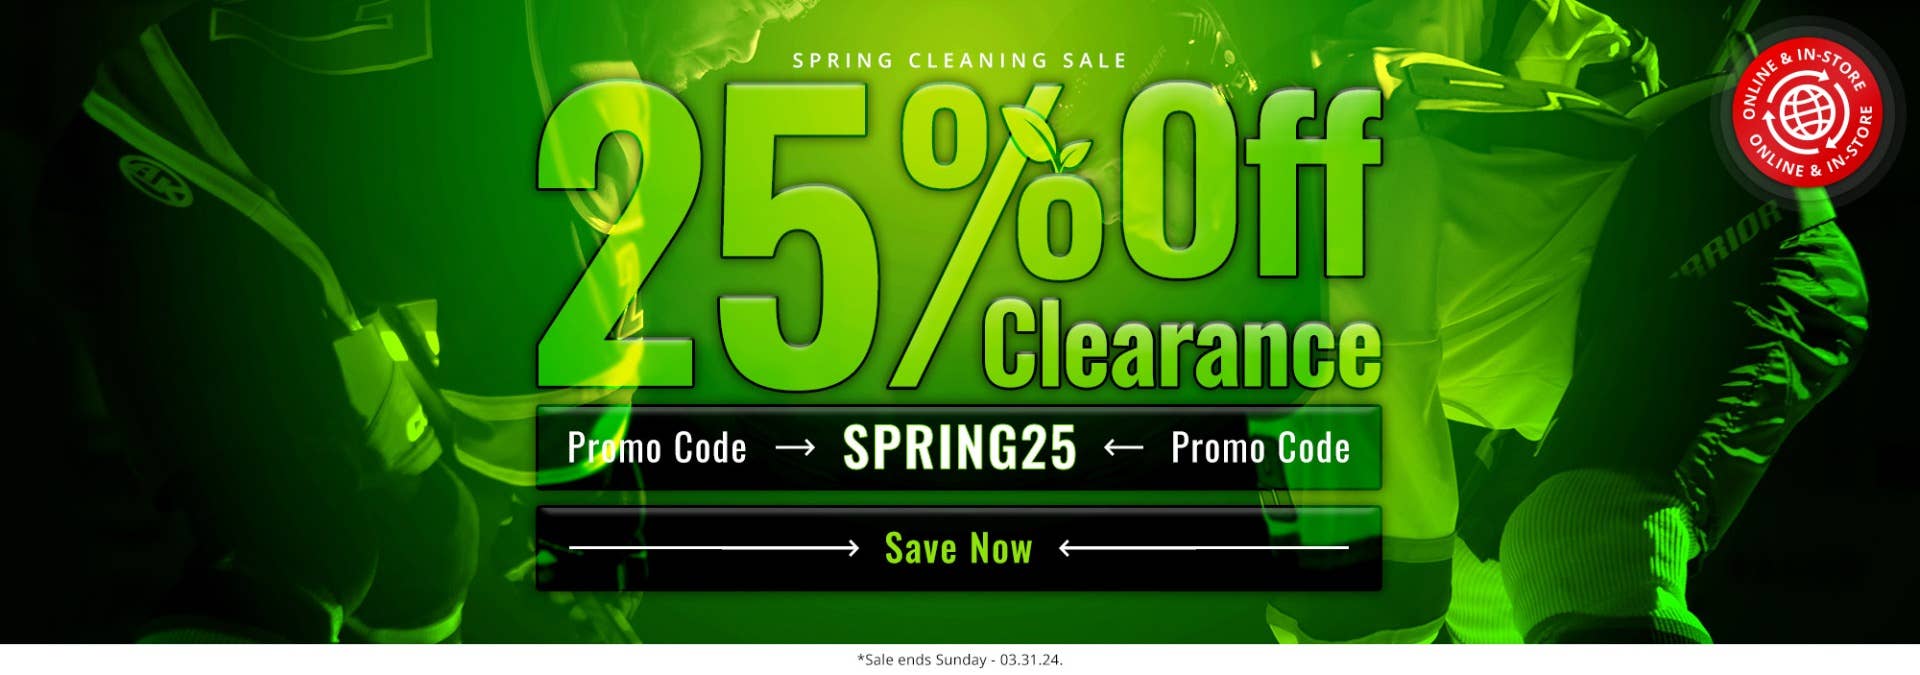 Spring Cleaning Sale: 25% Off Clearance